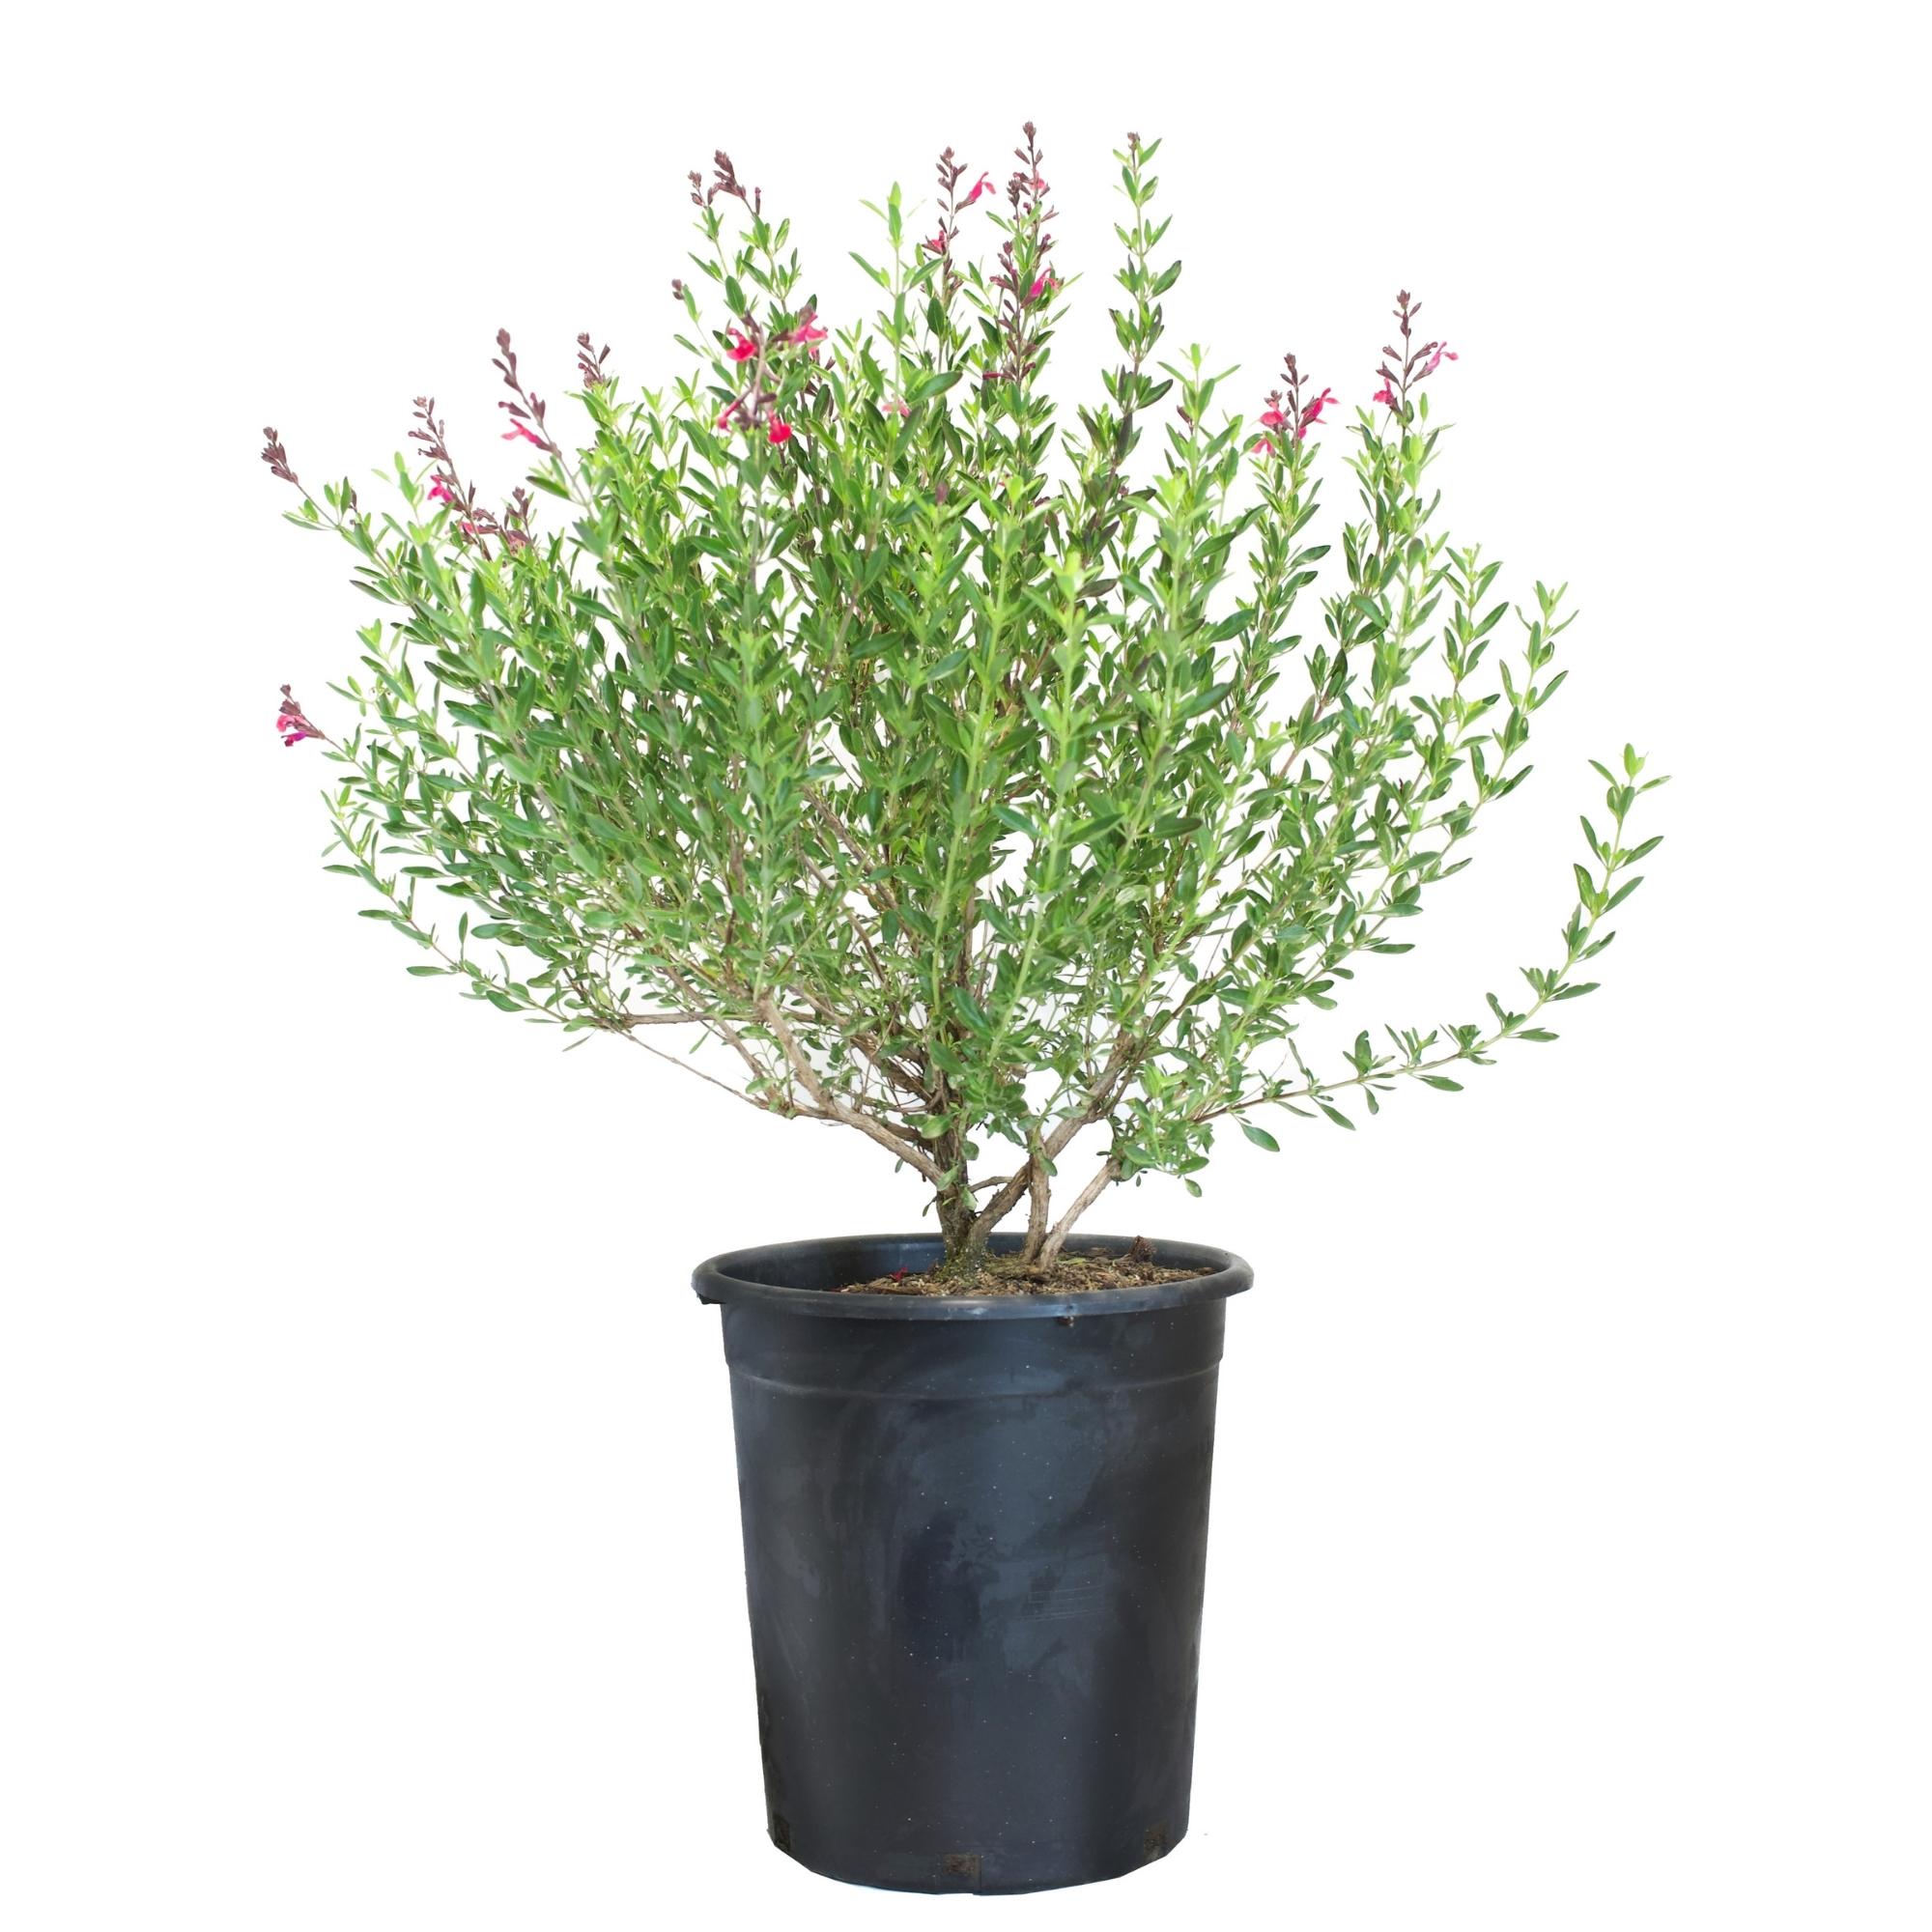 Pink salvia in a black nursery pot with a white background.